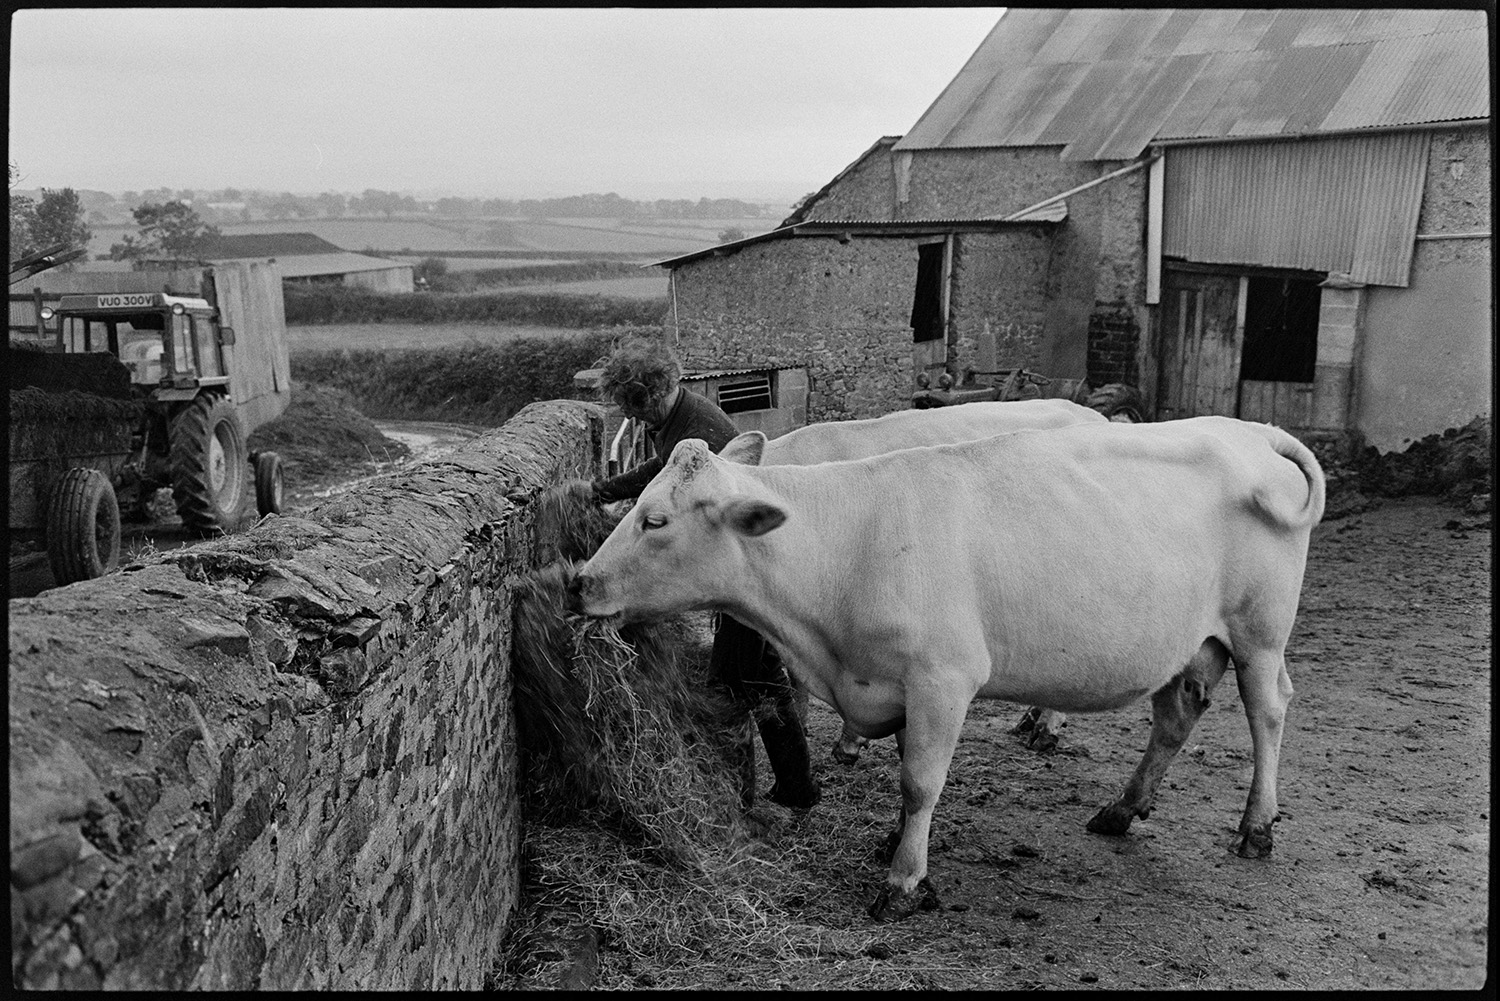 Cattle eating silage, cow suckling calf in yard. 
[A man putting out hay for two cows in a walled farmyard at Ingleigh Green. A barn with a corrugated iron roof is visible in the background and a tractor and muck spreader can be seen in the lane behind the wall.]